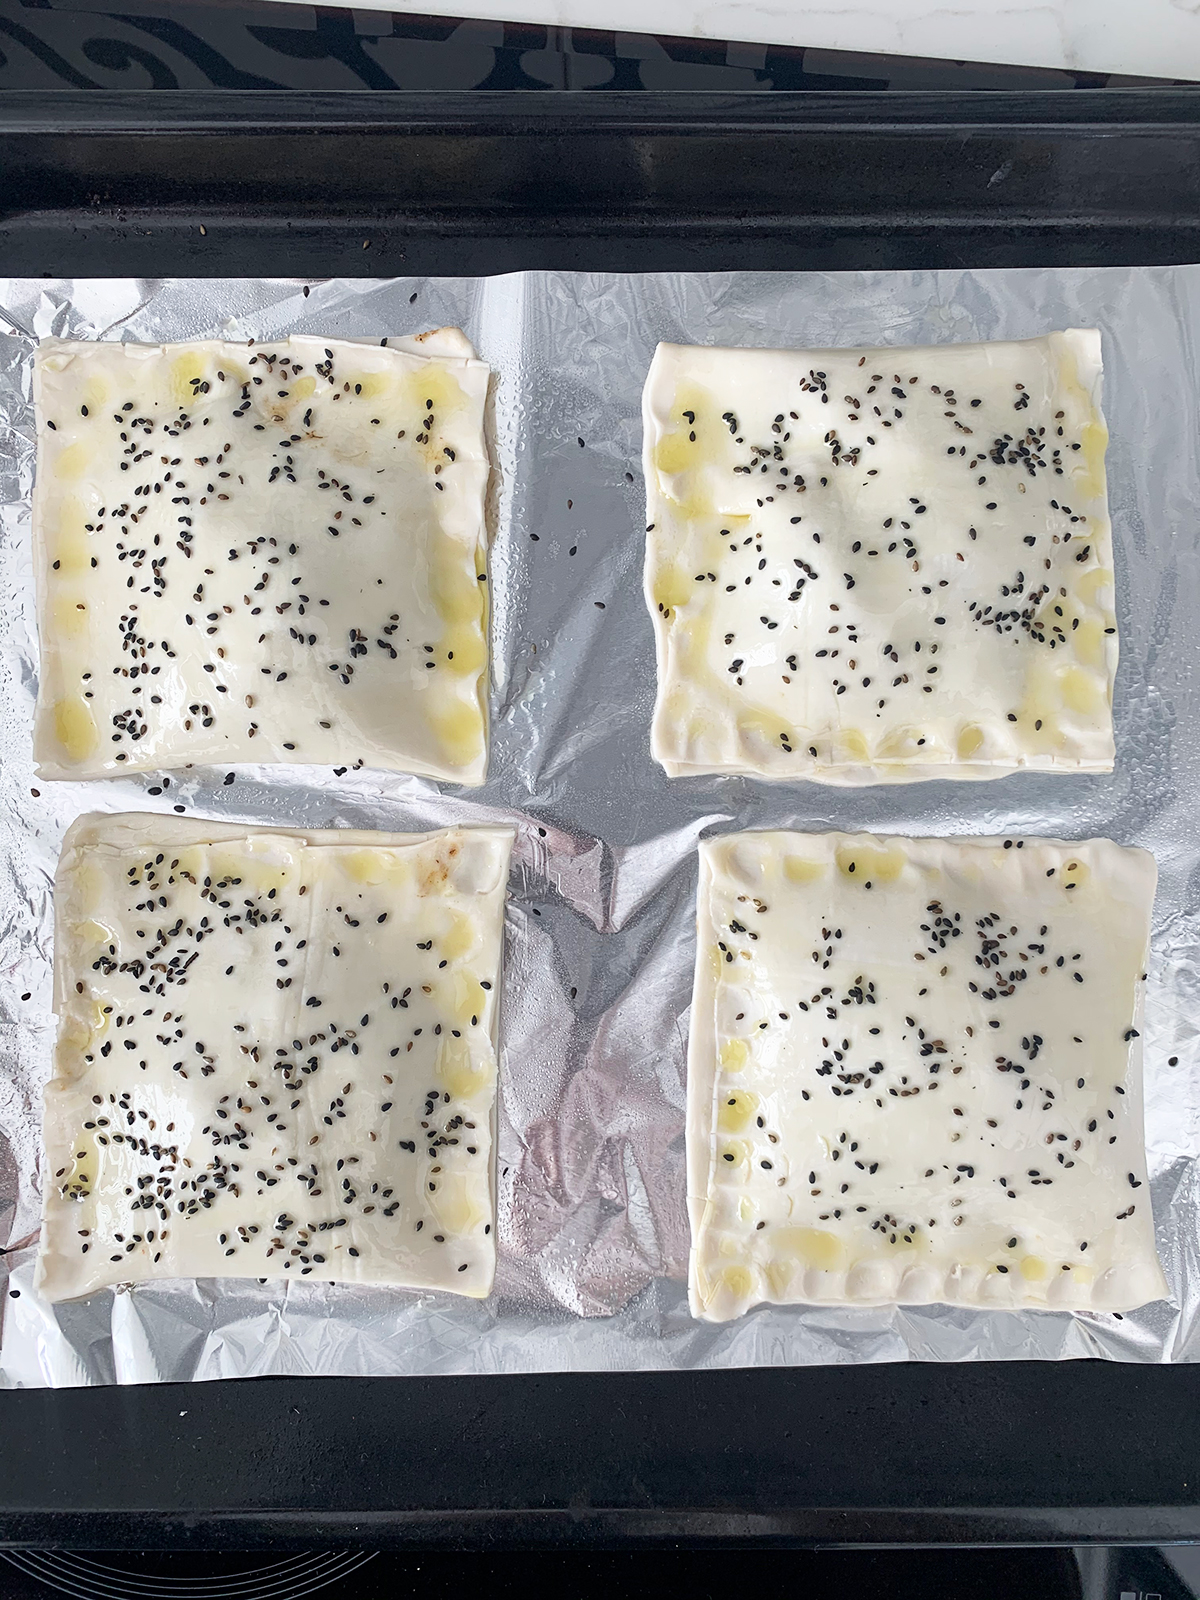 Purslane pockets smeared with olive oil and sprinkles of black sesame on baking tray ready for baking